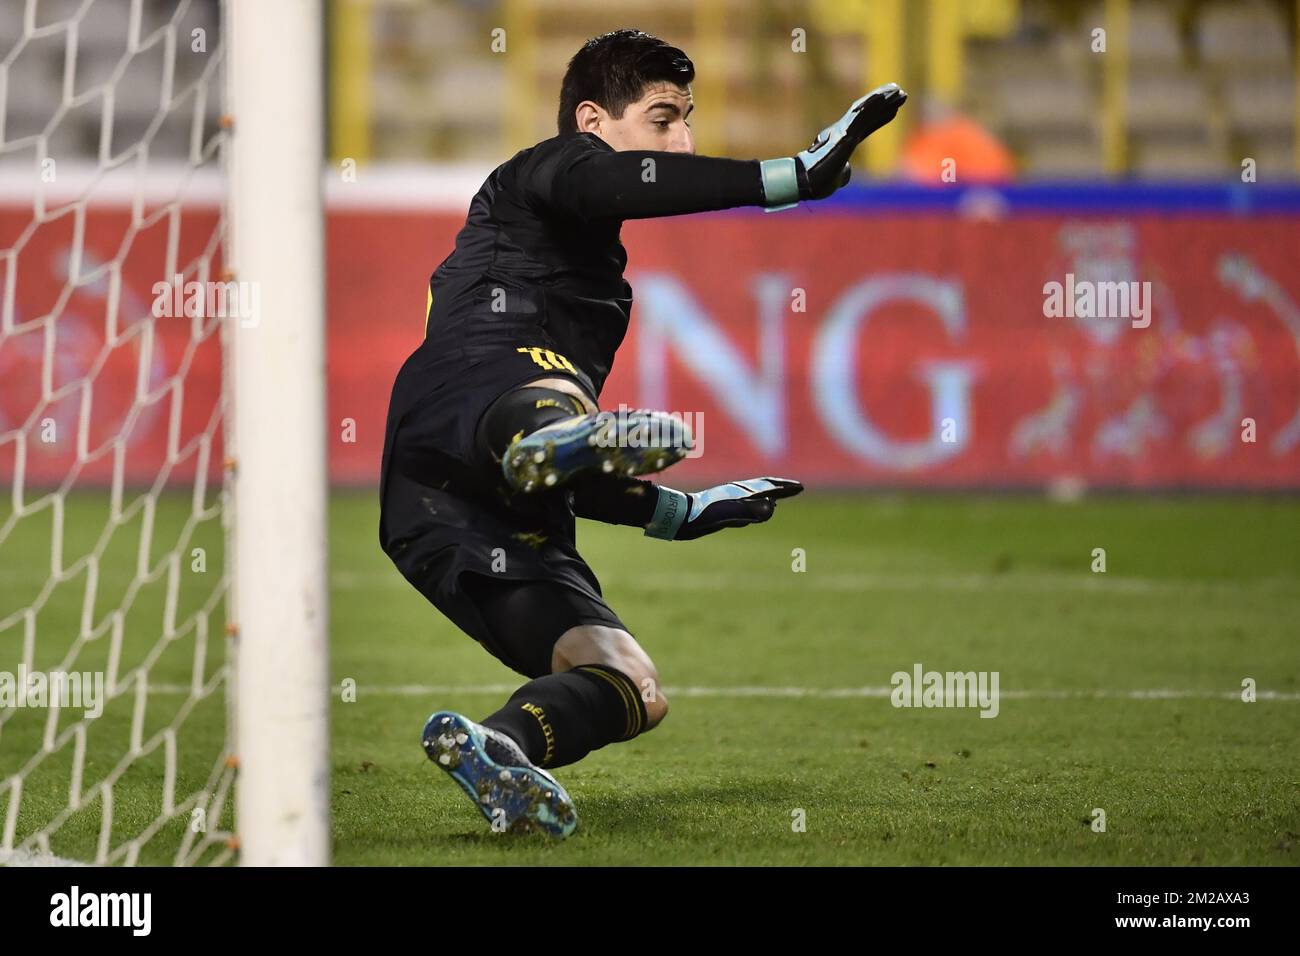 Belgium's goalkeeper Thibaut Courtois fails to stop the penalty from Mexico's Andres Guardado (not pictured) during a friendly soccer game between Belgian national team Red Devils and Mexico, Friday 10 November 2017, in Brugge. BELGA PHOTO DIRK WAEM  Stock Photo